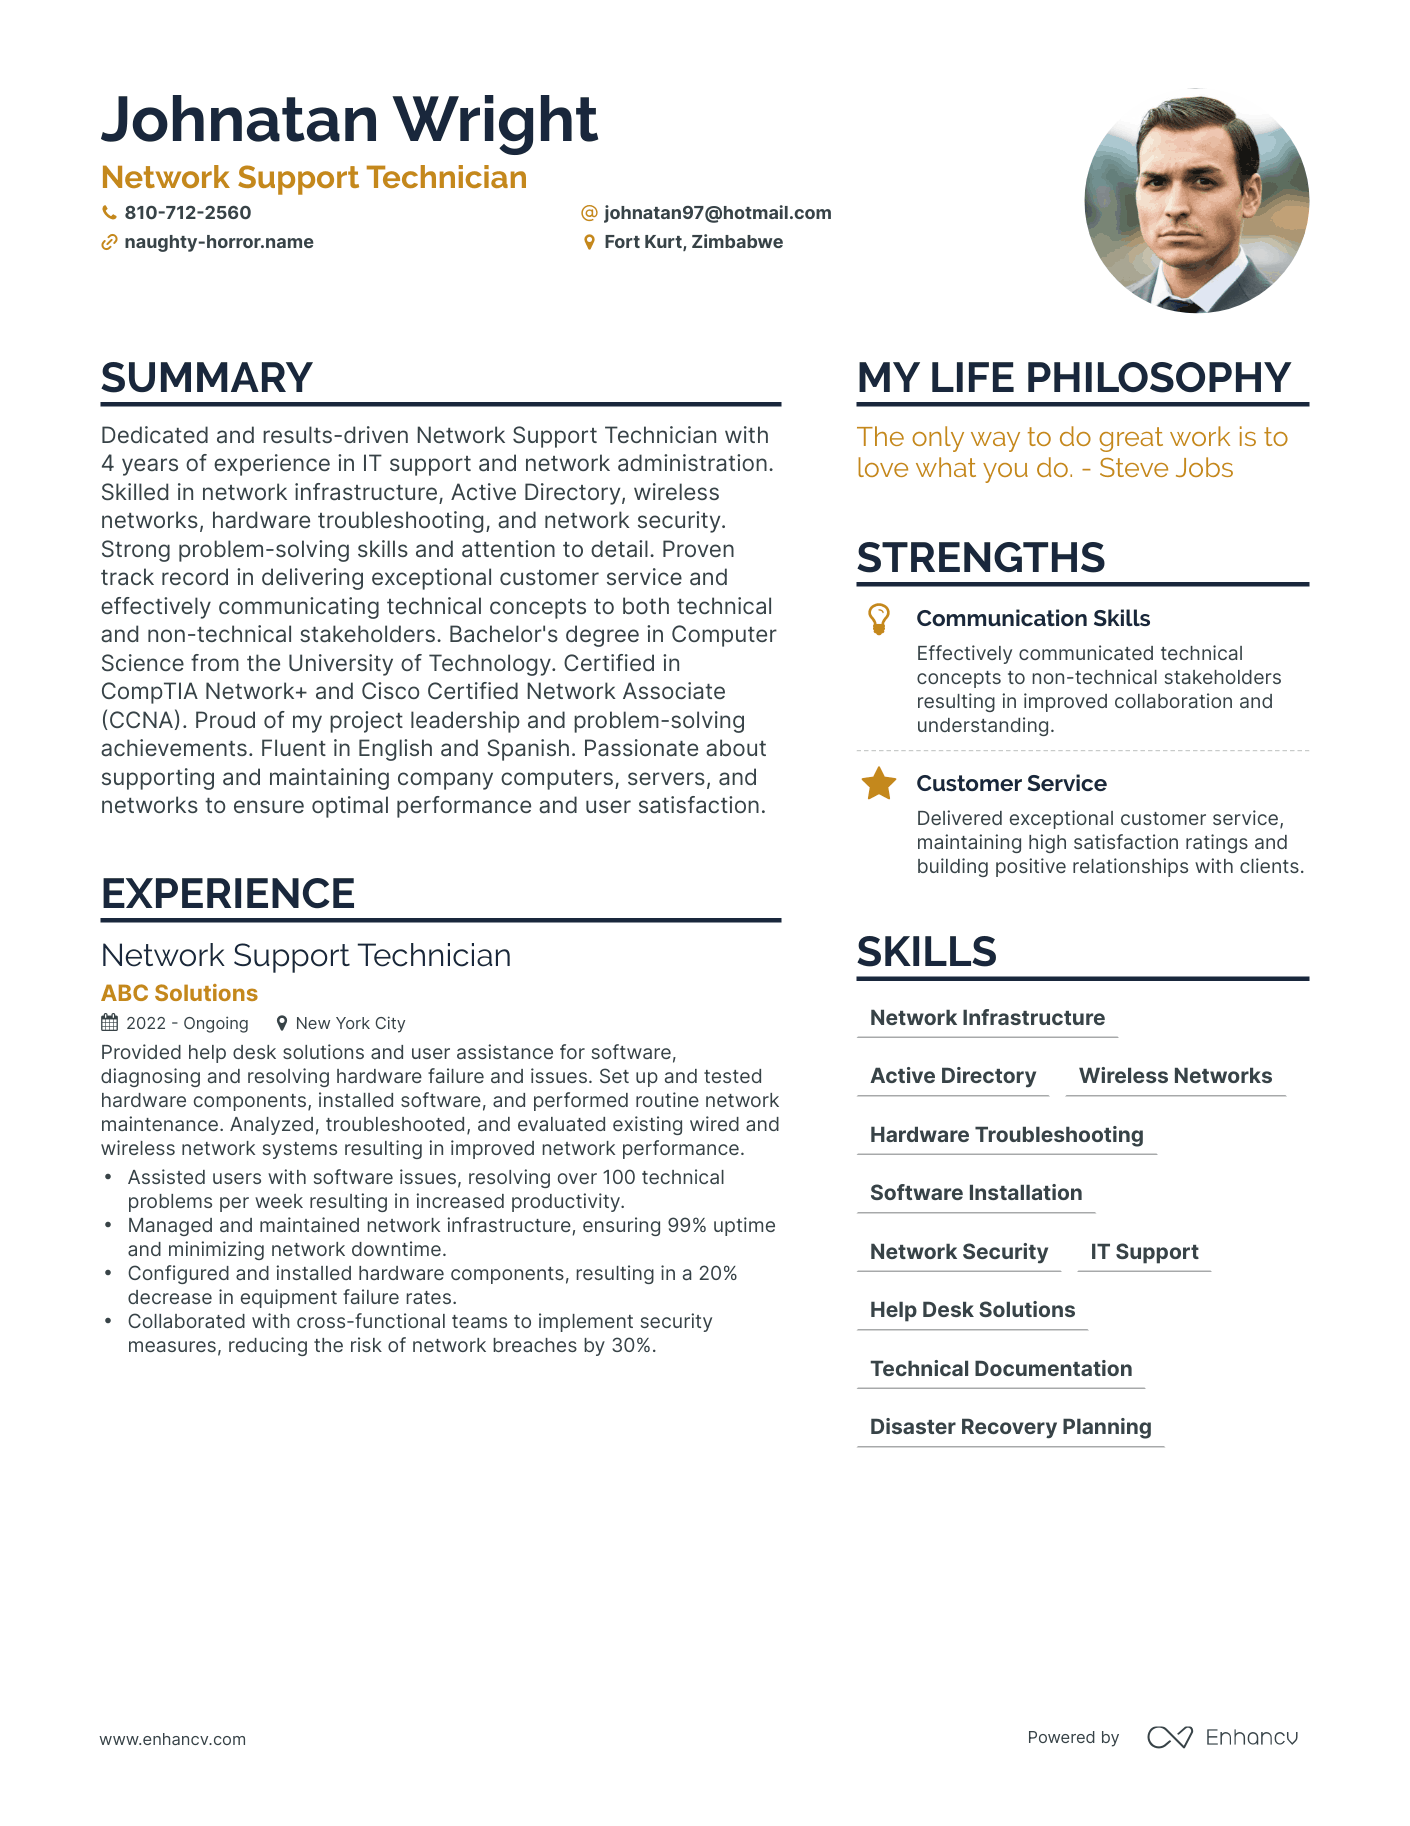 Network Support Technician resume example